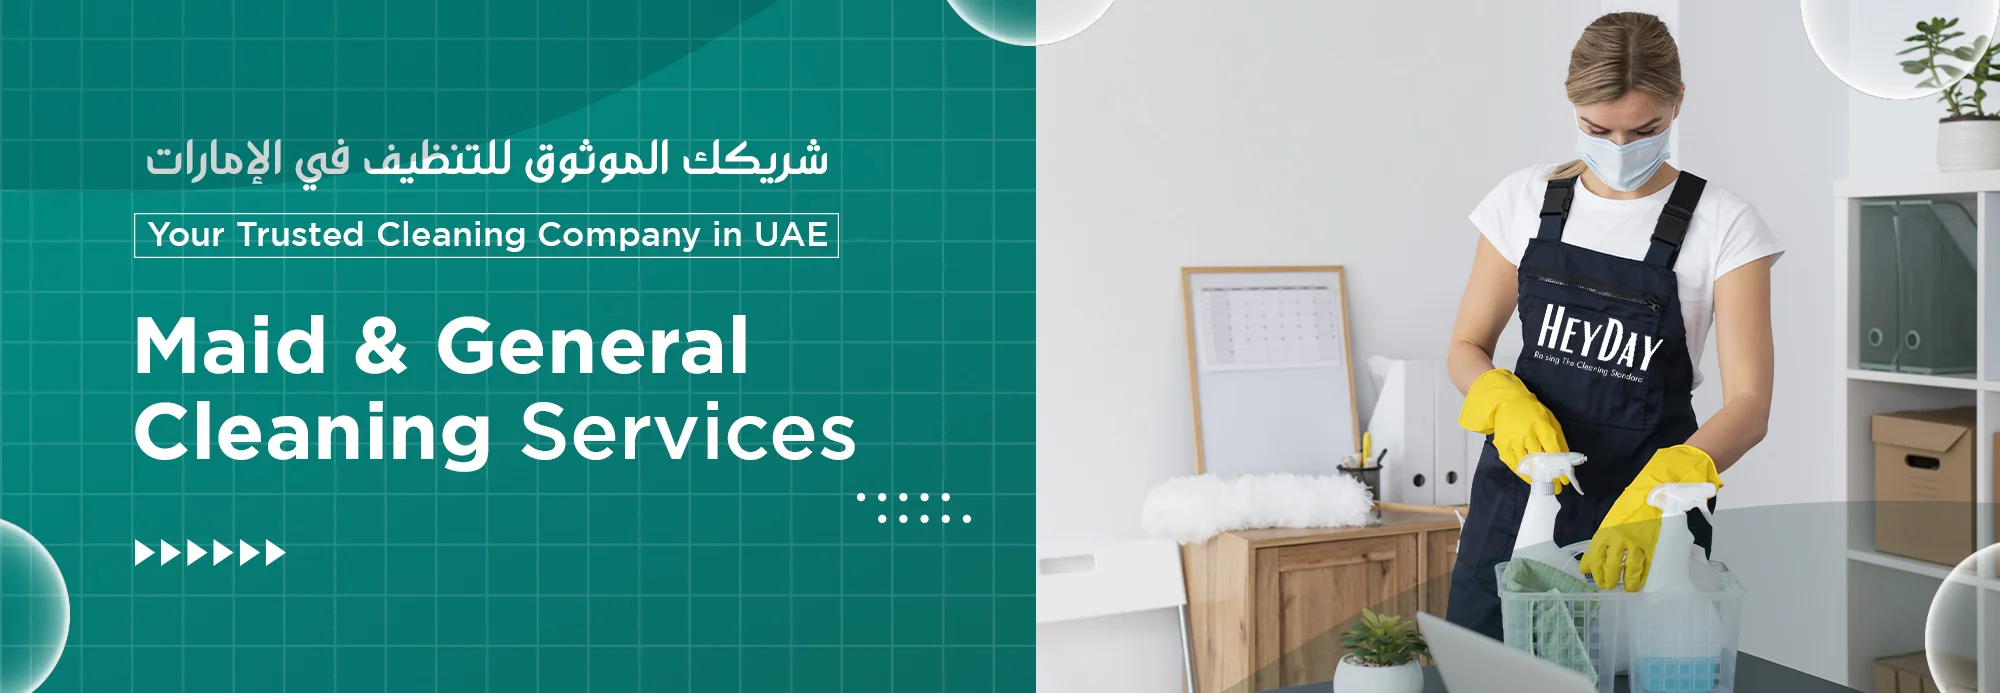 general & maid cleaning service dubai